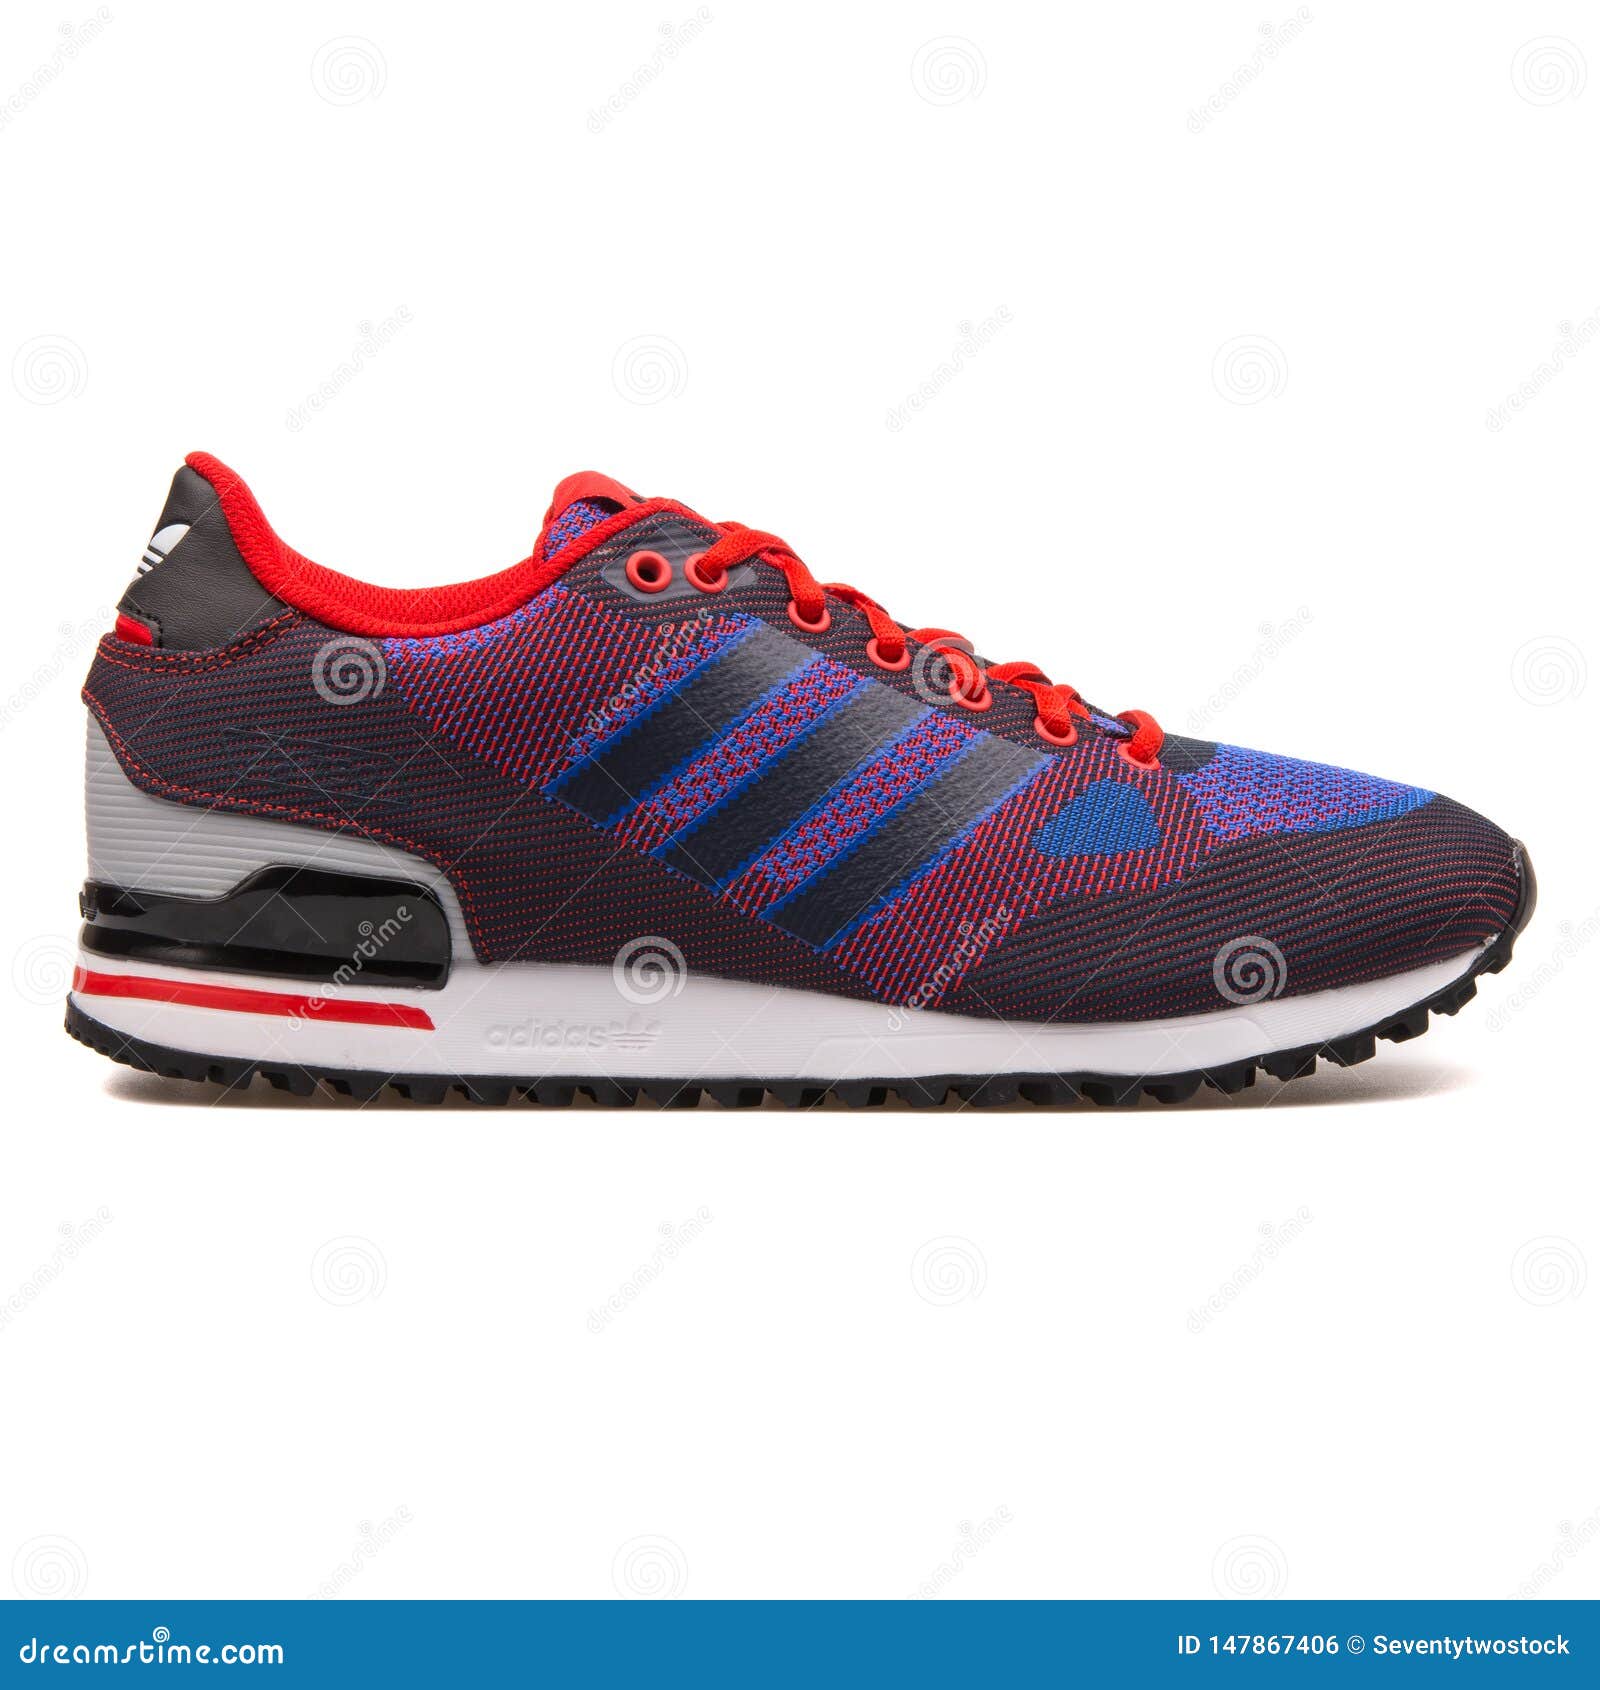 adidas zx 750 red white blue